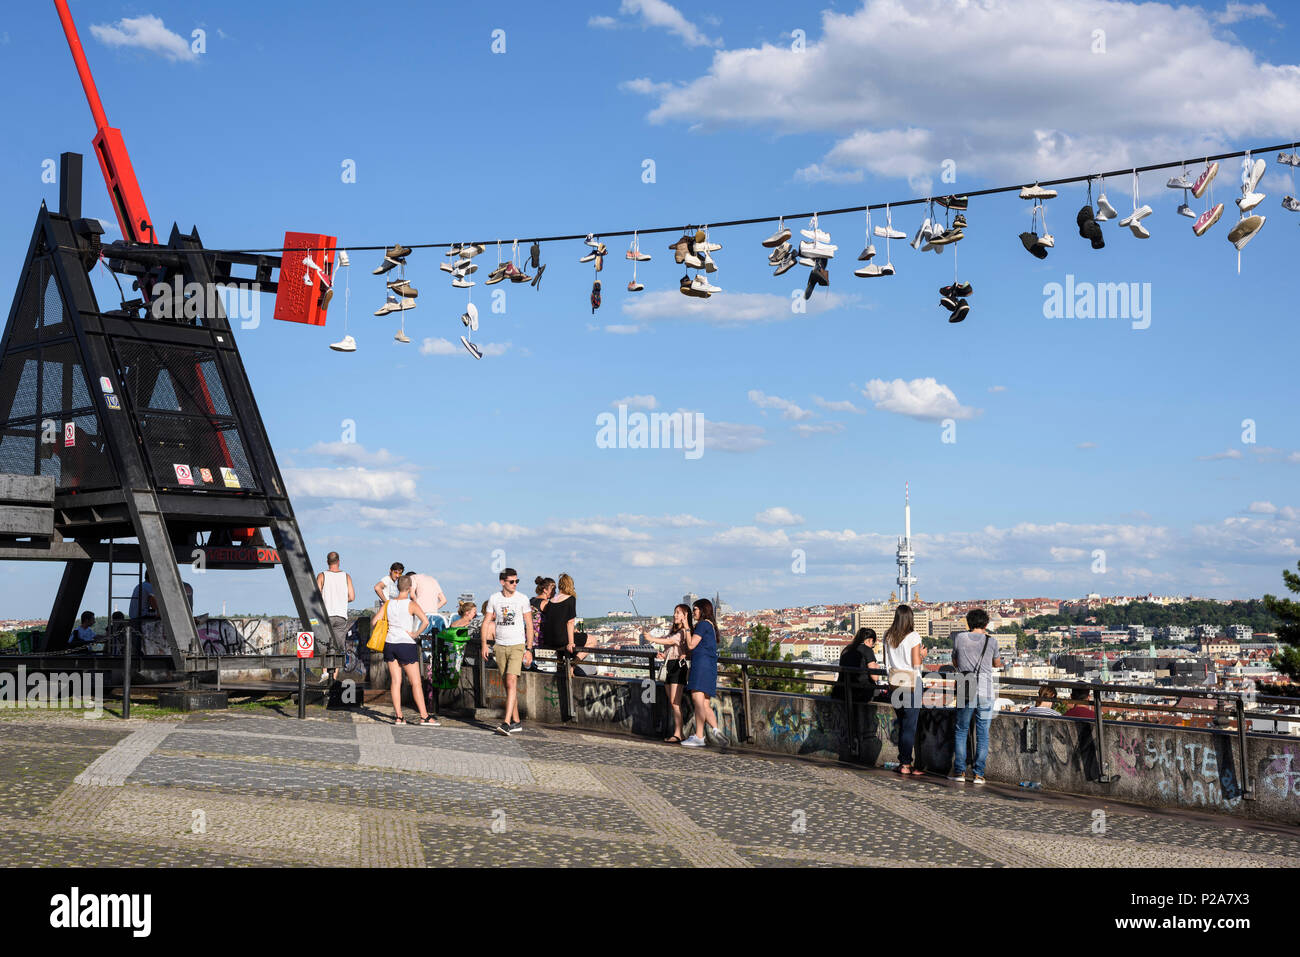 Prague. Czech Republic. People gather at the Metronome in Letná Park for  views across the city Stock Photo - Alamy